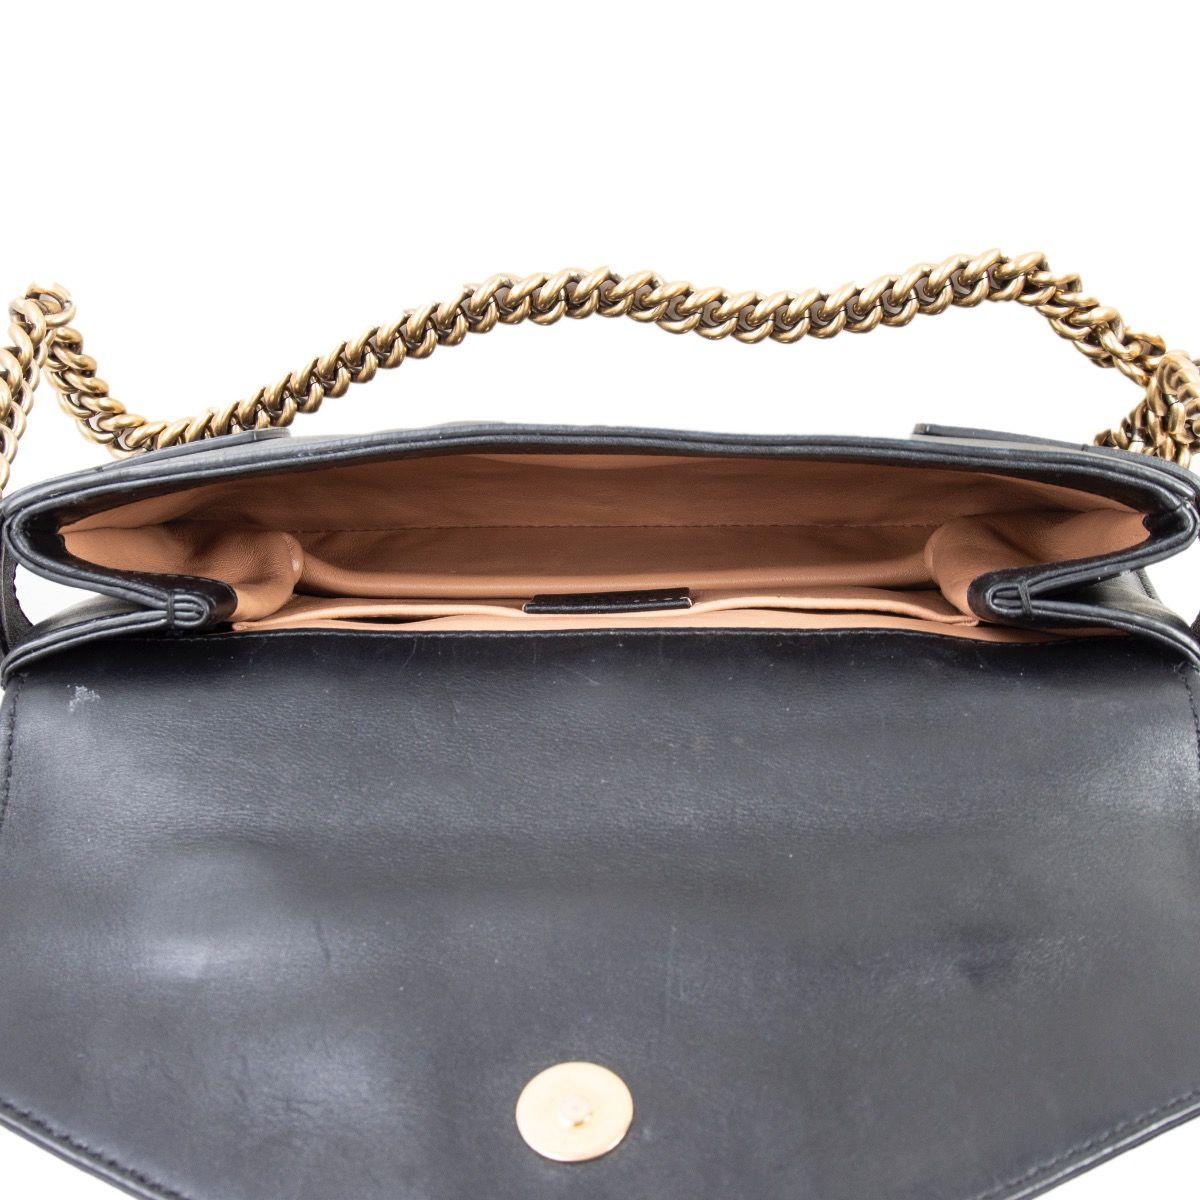 Black GUCCI black leather BROADWAY PEARLY BEE MINI Shoulder Bag